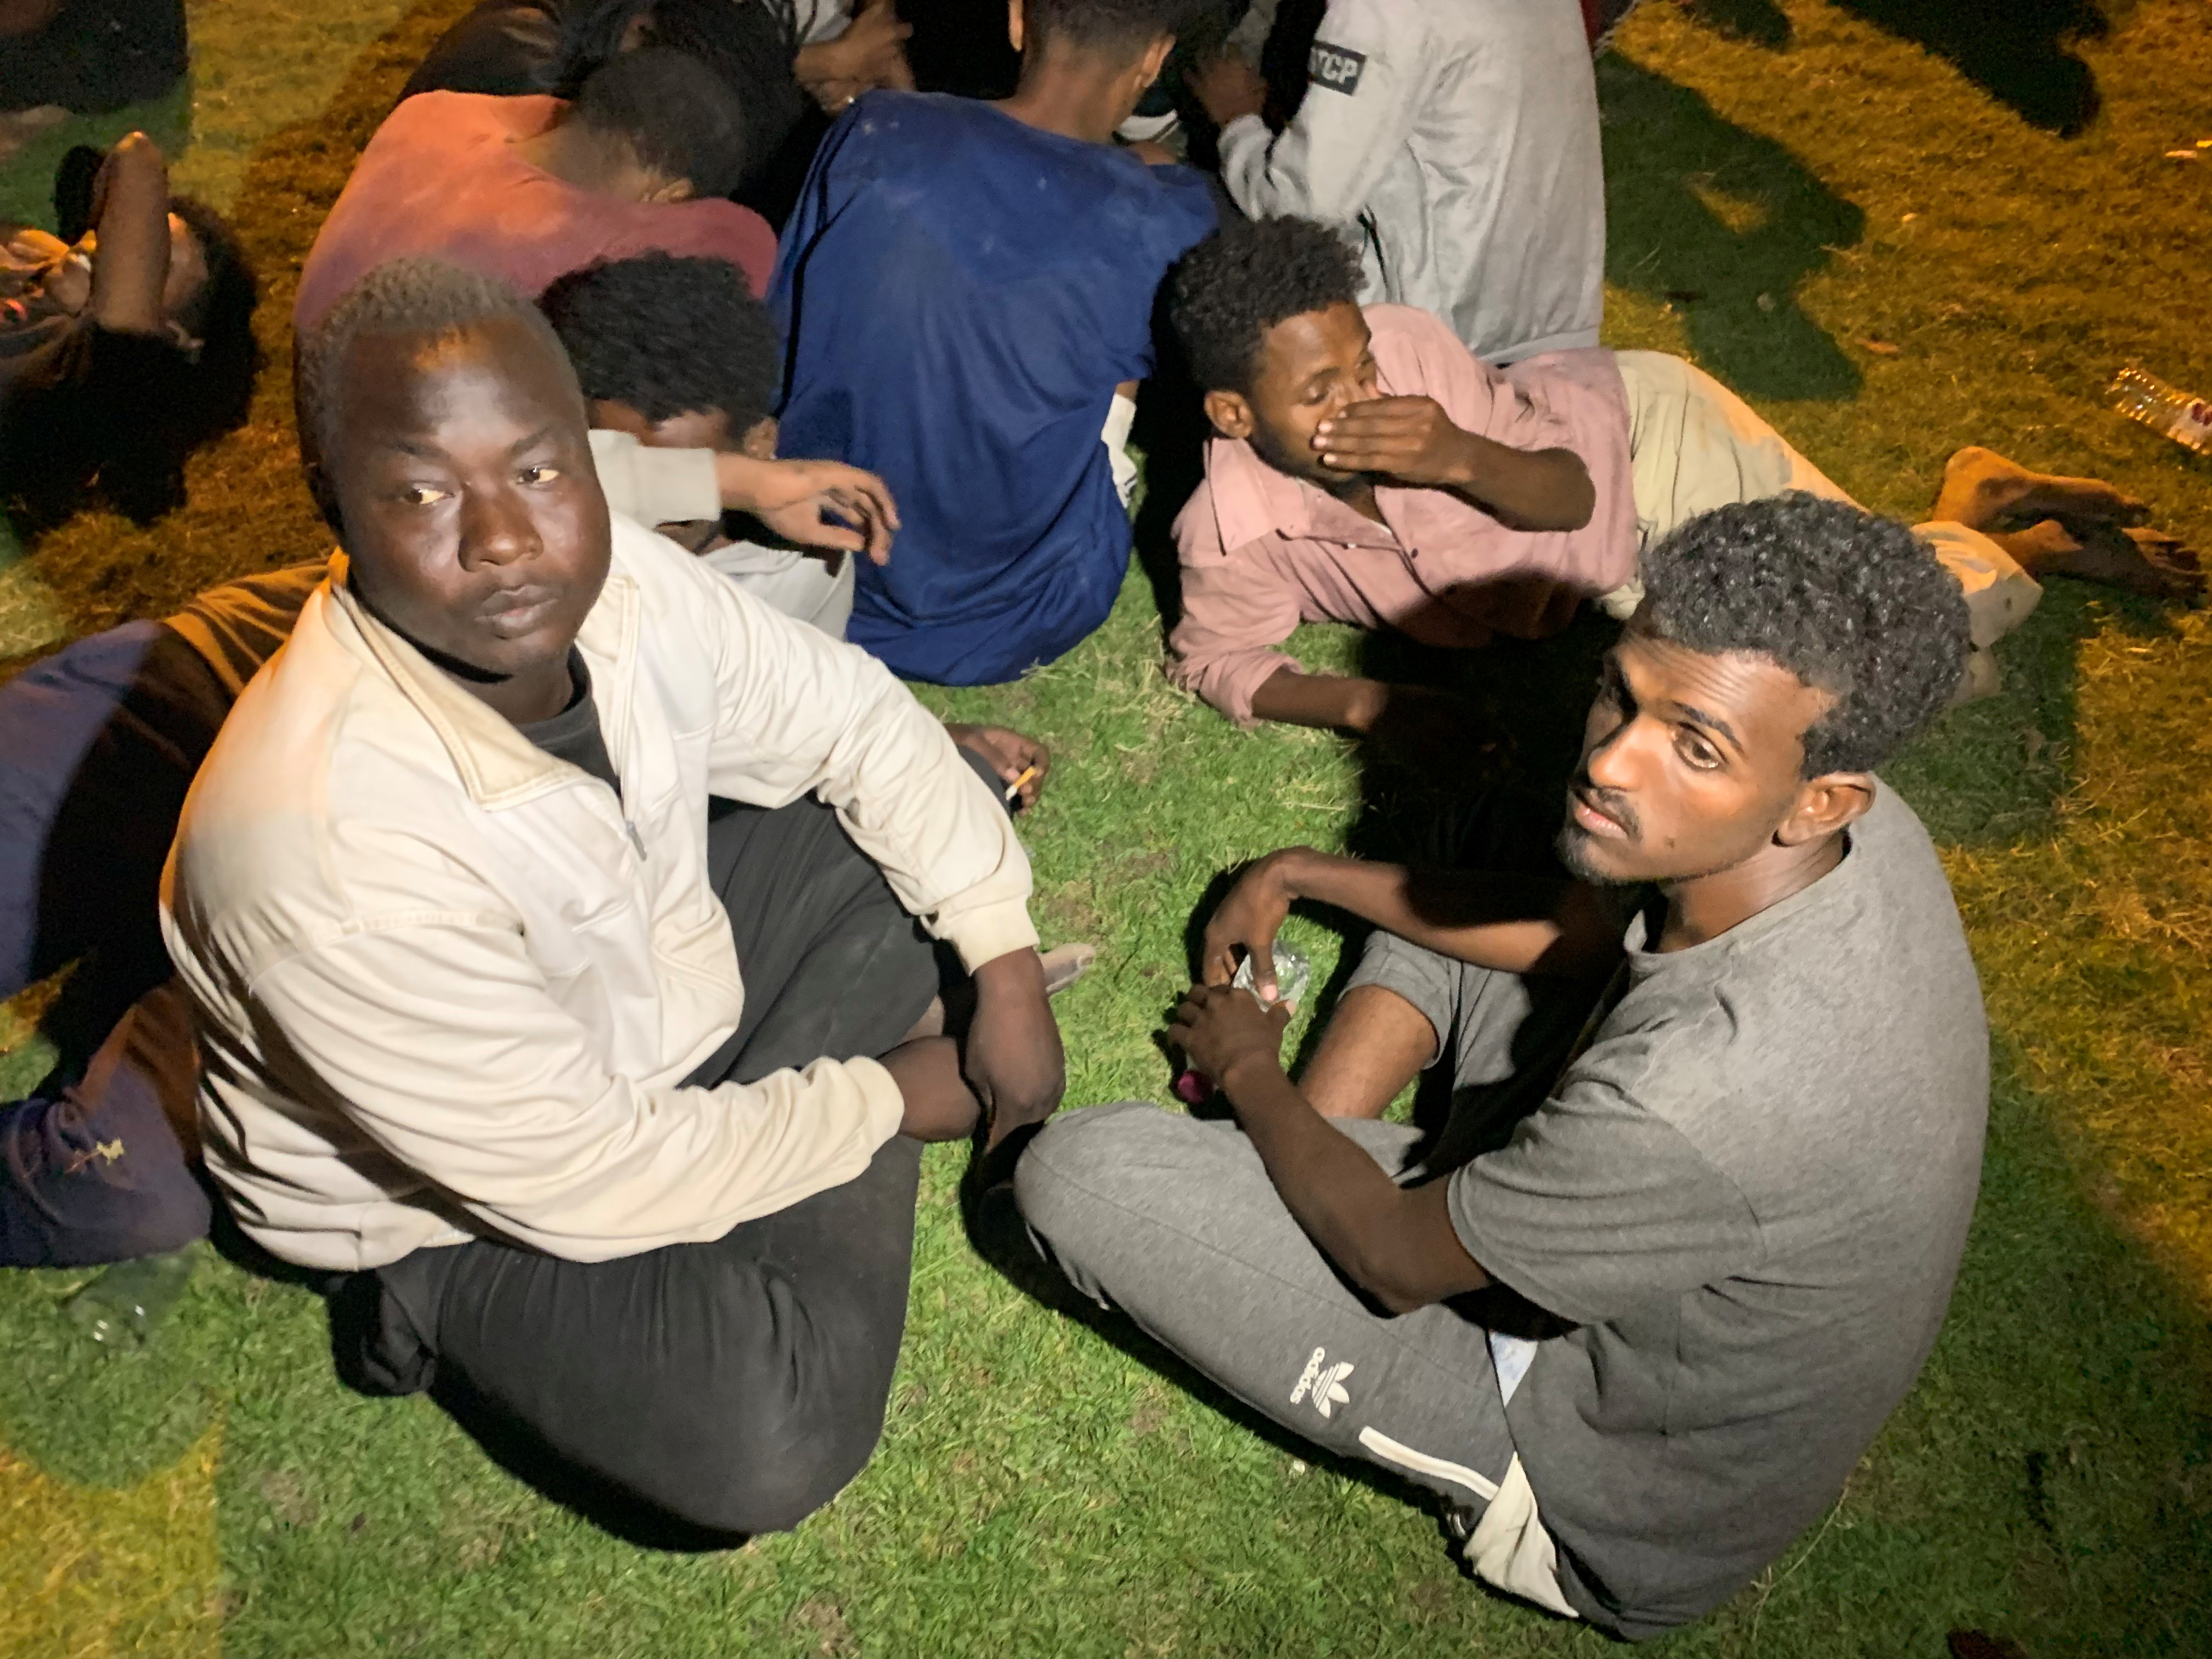 Migrants are seen after they were detained by Libyan security forces in Tripoli